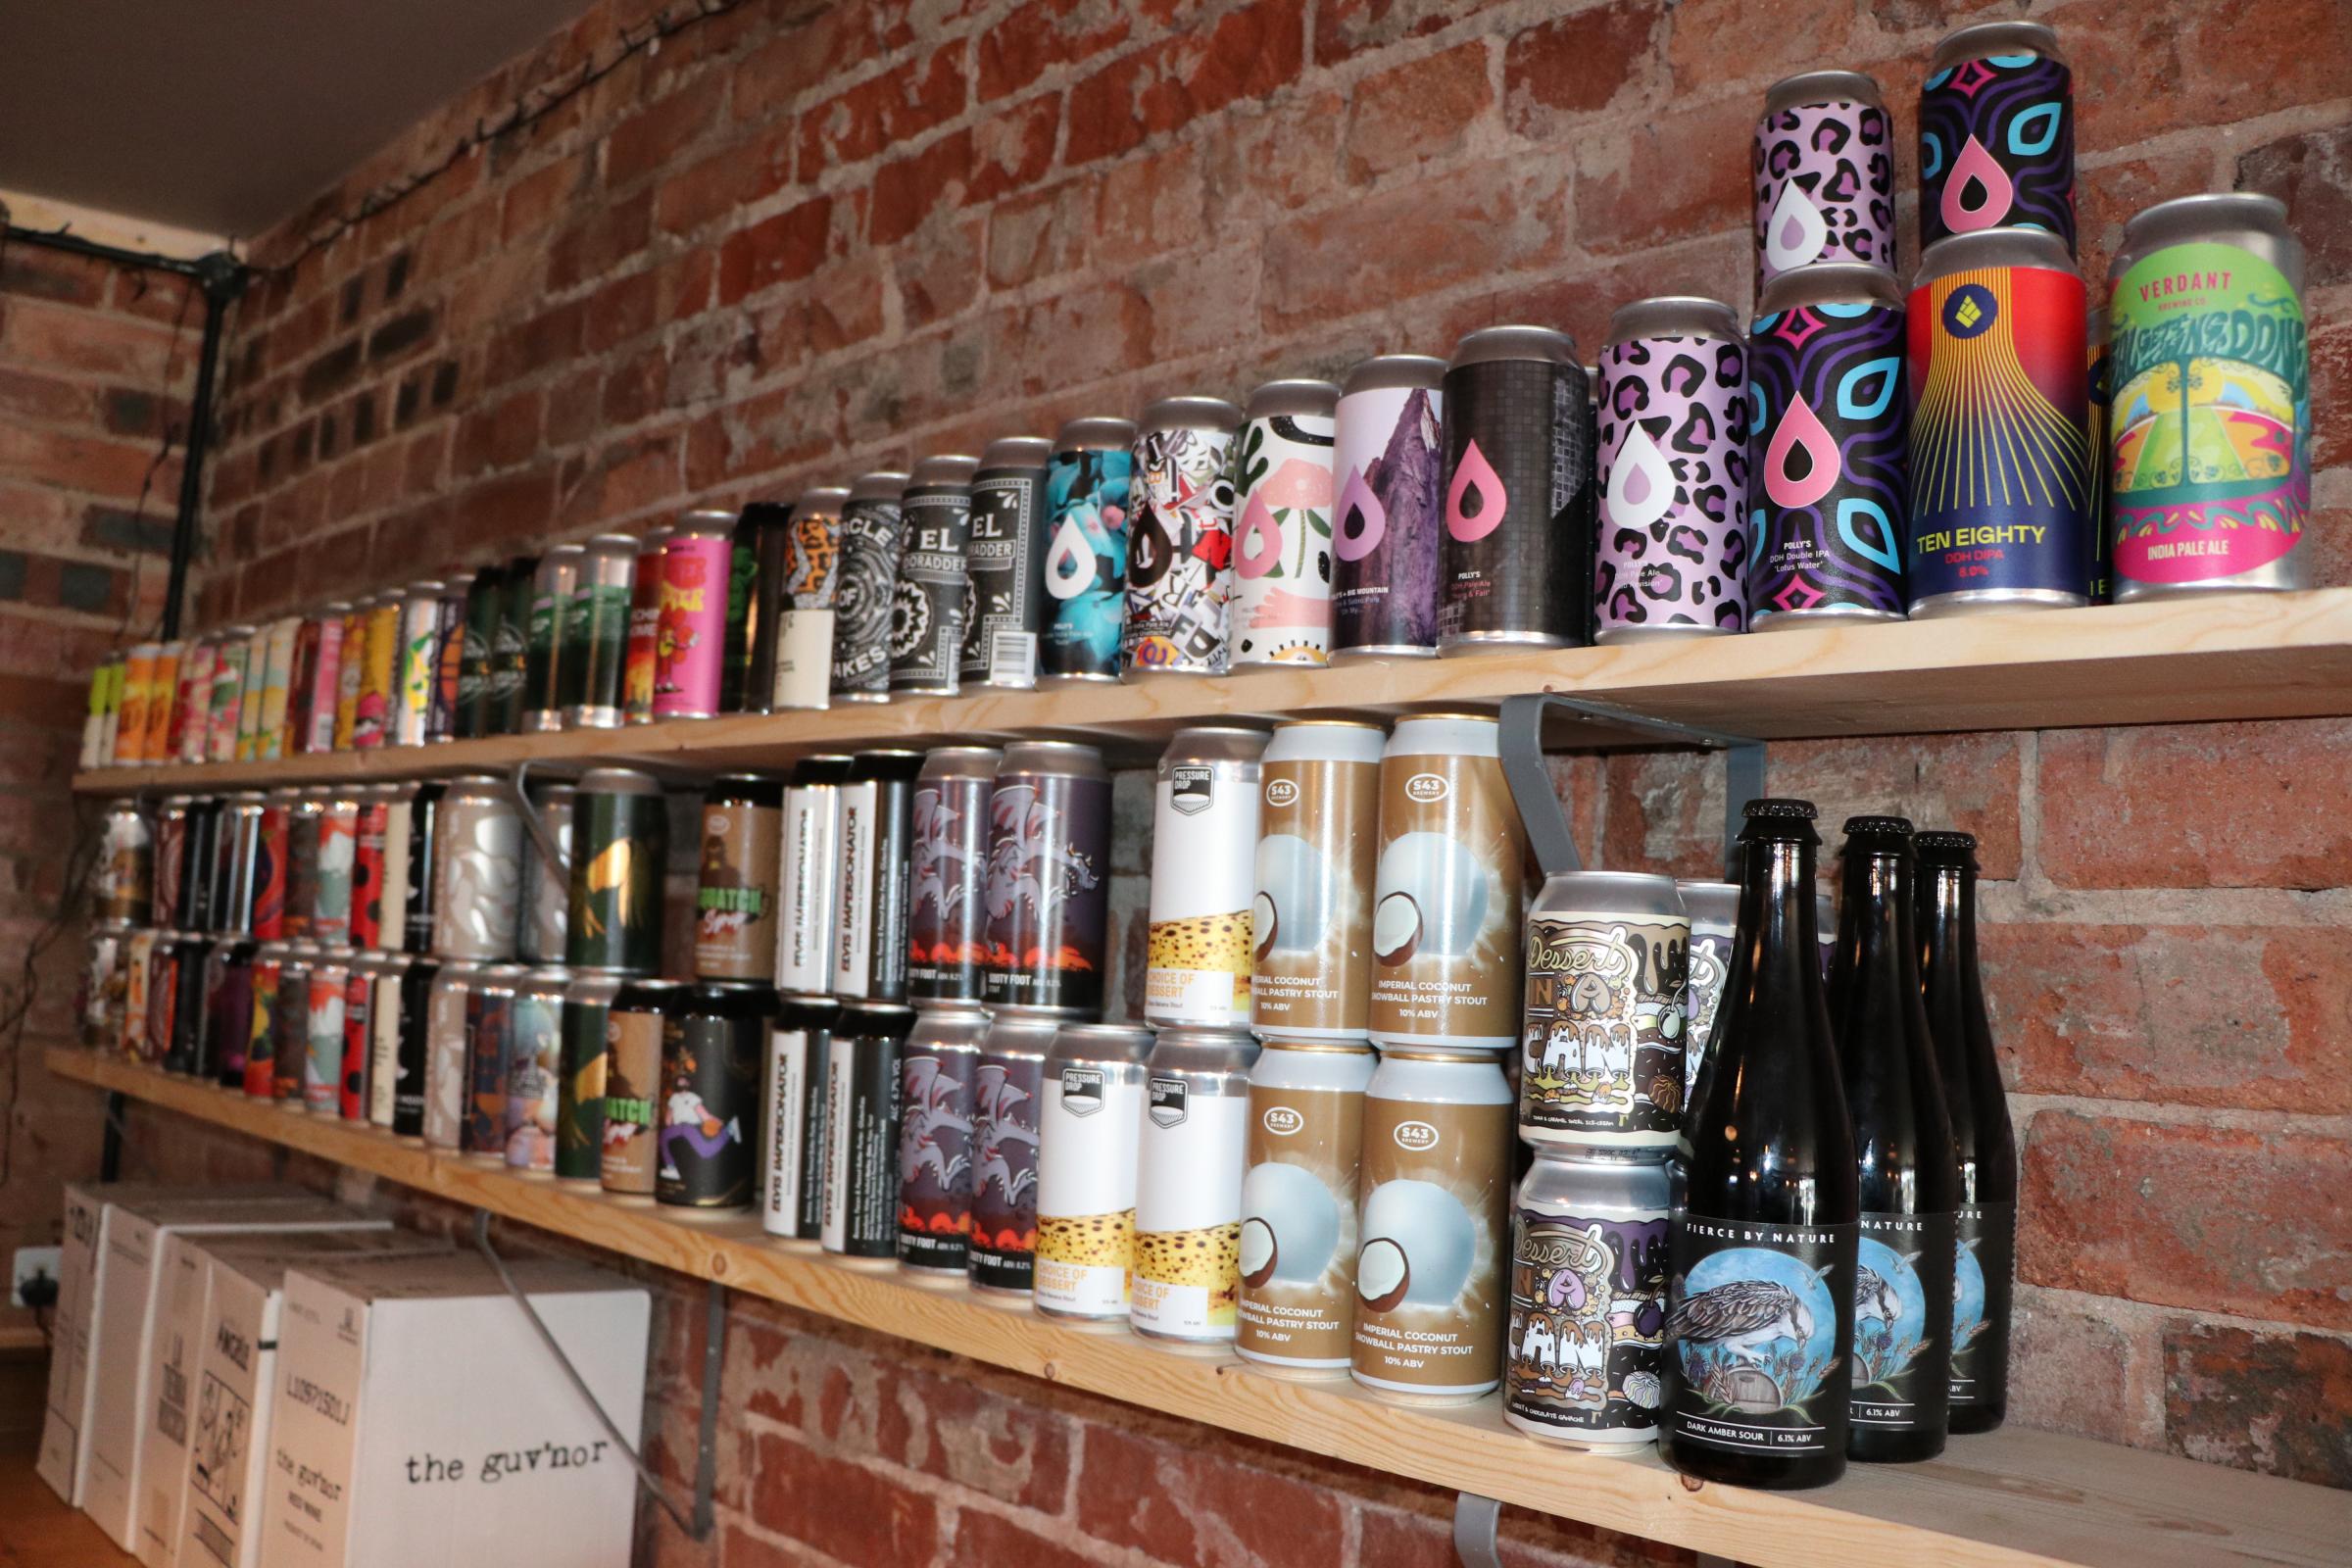 A vast array of unusual beers are lined up ready to be sold in the Bow-Legged Beagle